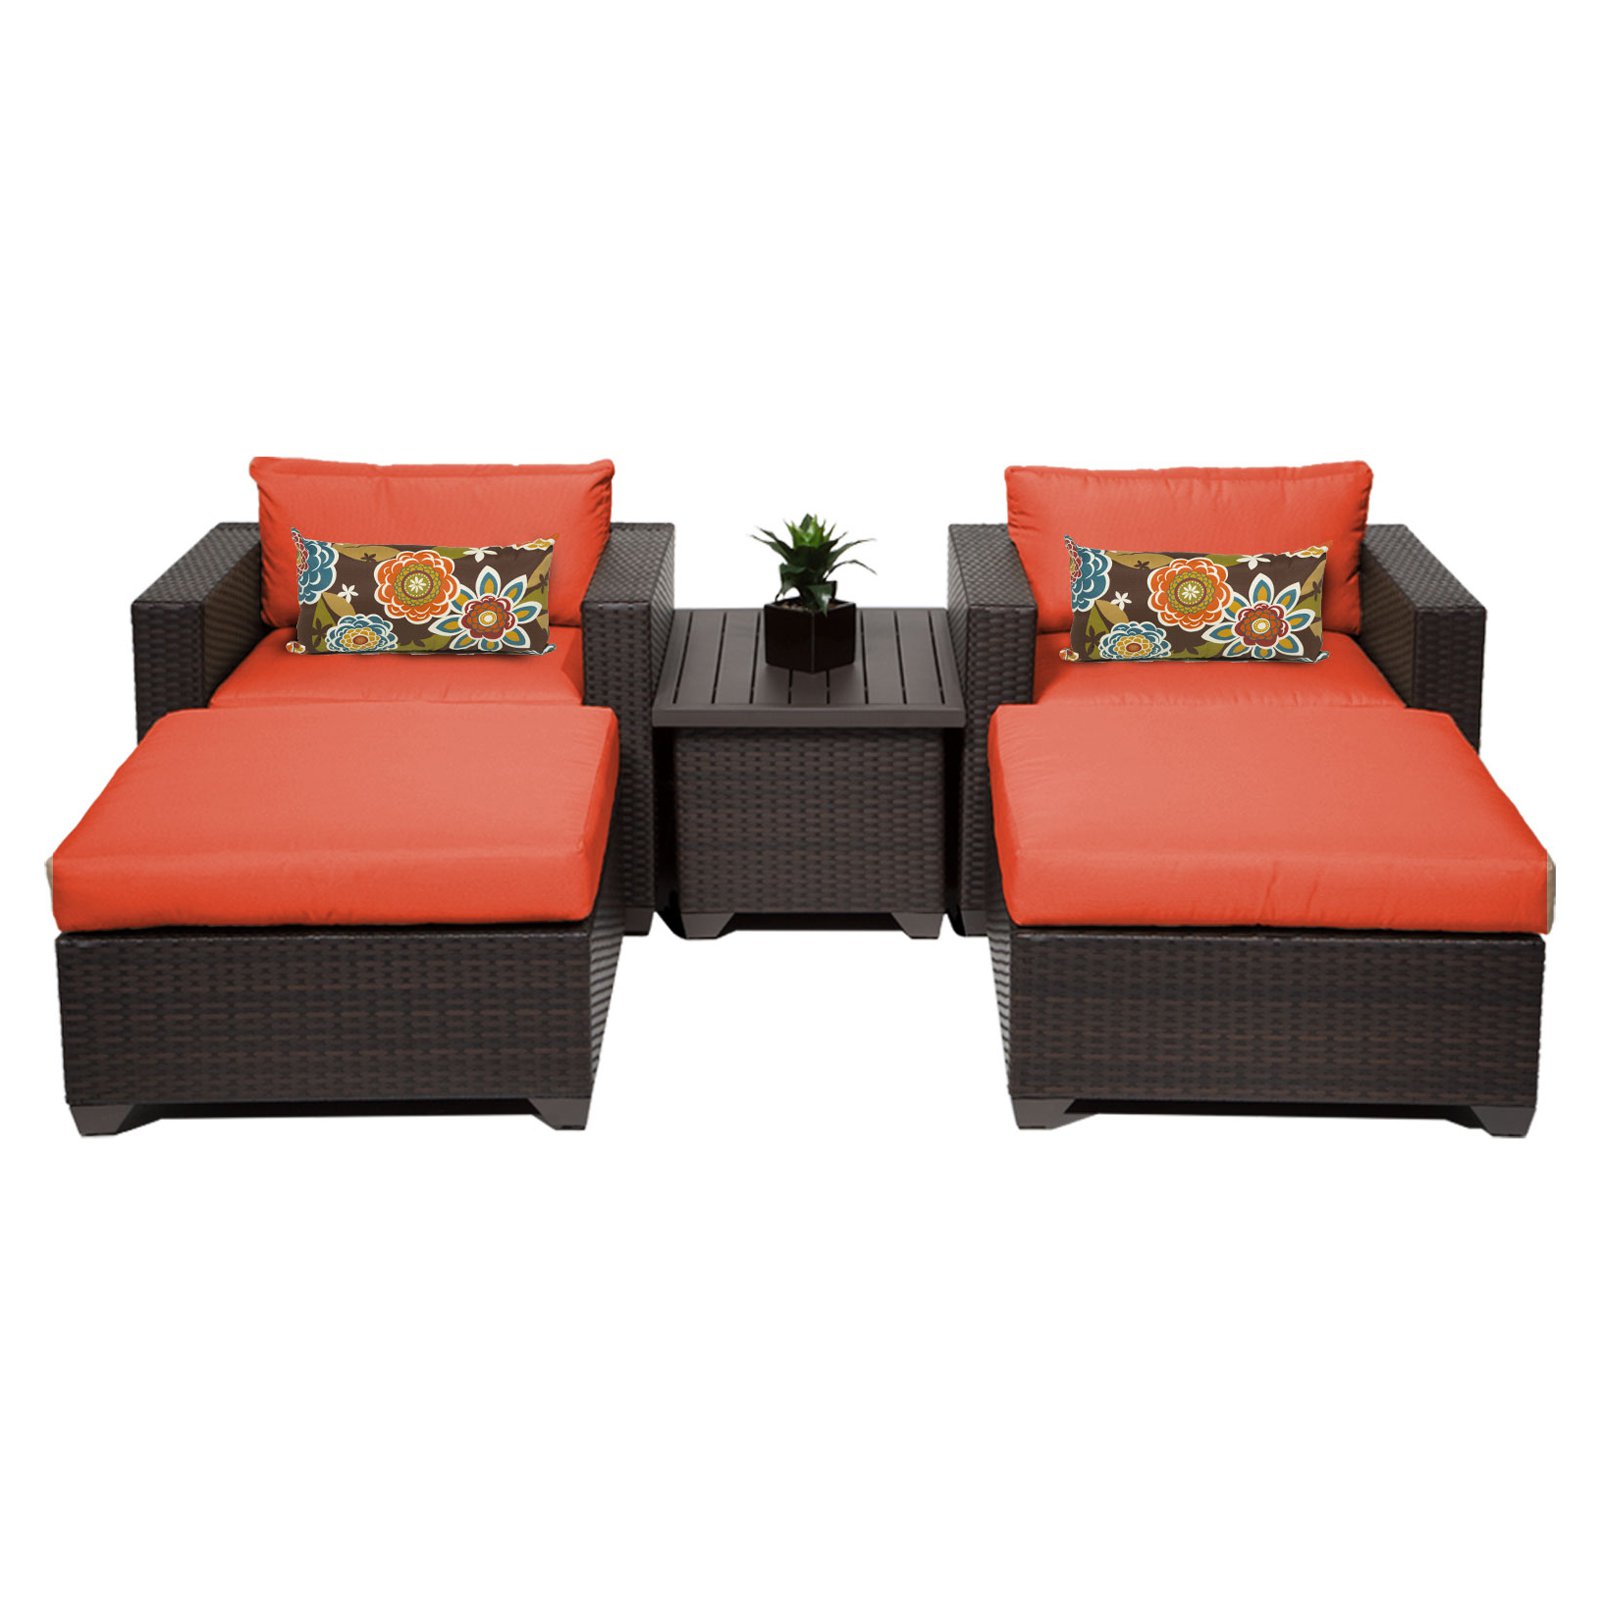 BELLE-05a-TANGERINE Belle 5 Piece Outdoor Wicker Patio Furniture Set 05a with 2 Covers: Wheat and Tangerine - image 1 of 2